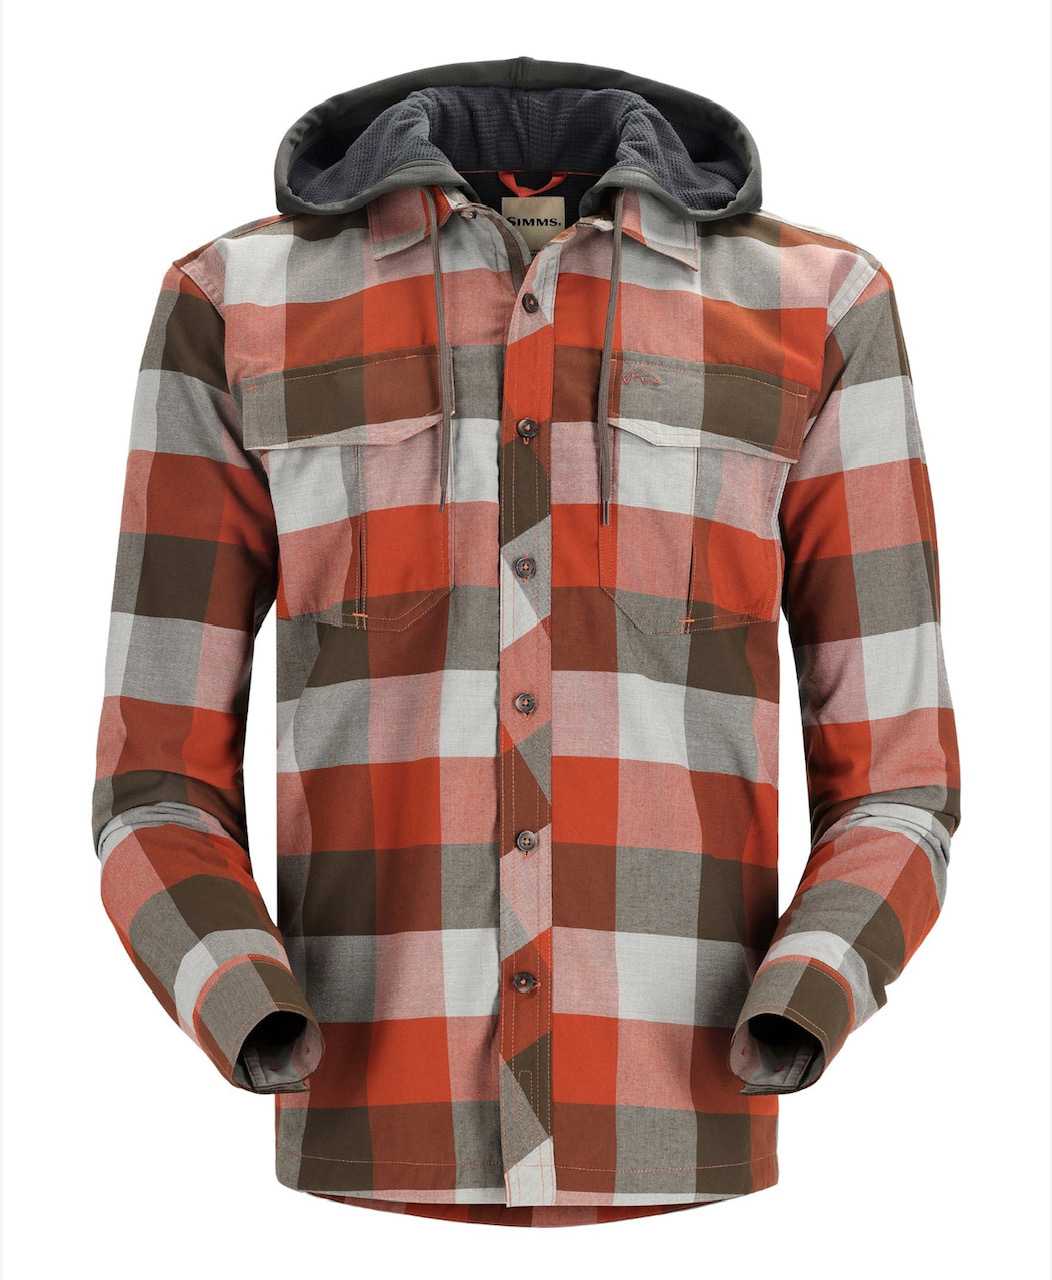 Simms M's Coldweather Hoody - Clay Buffalo Plaid - Large